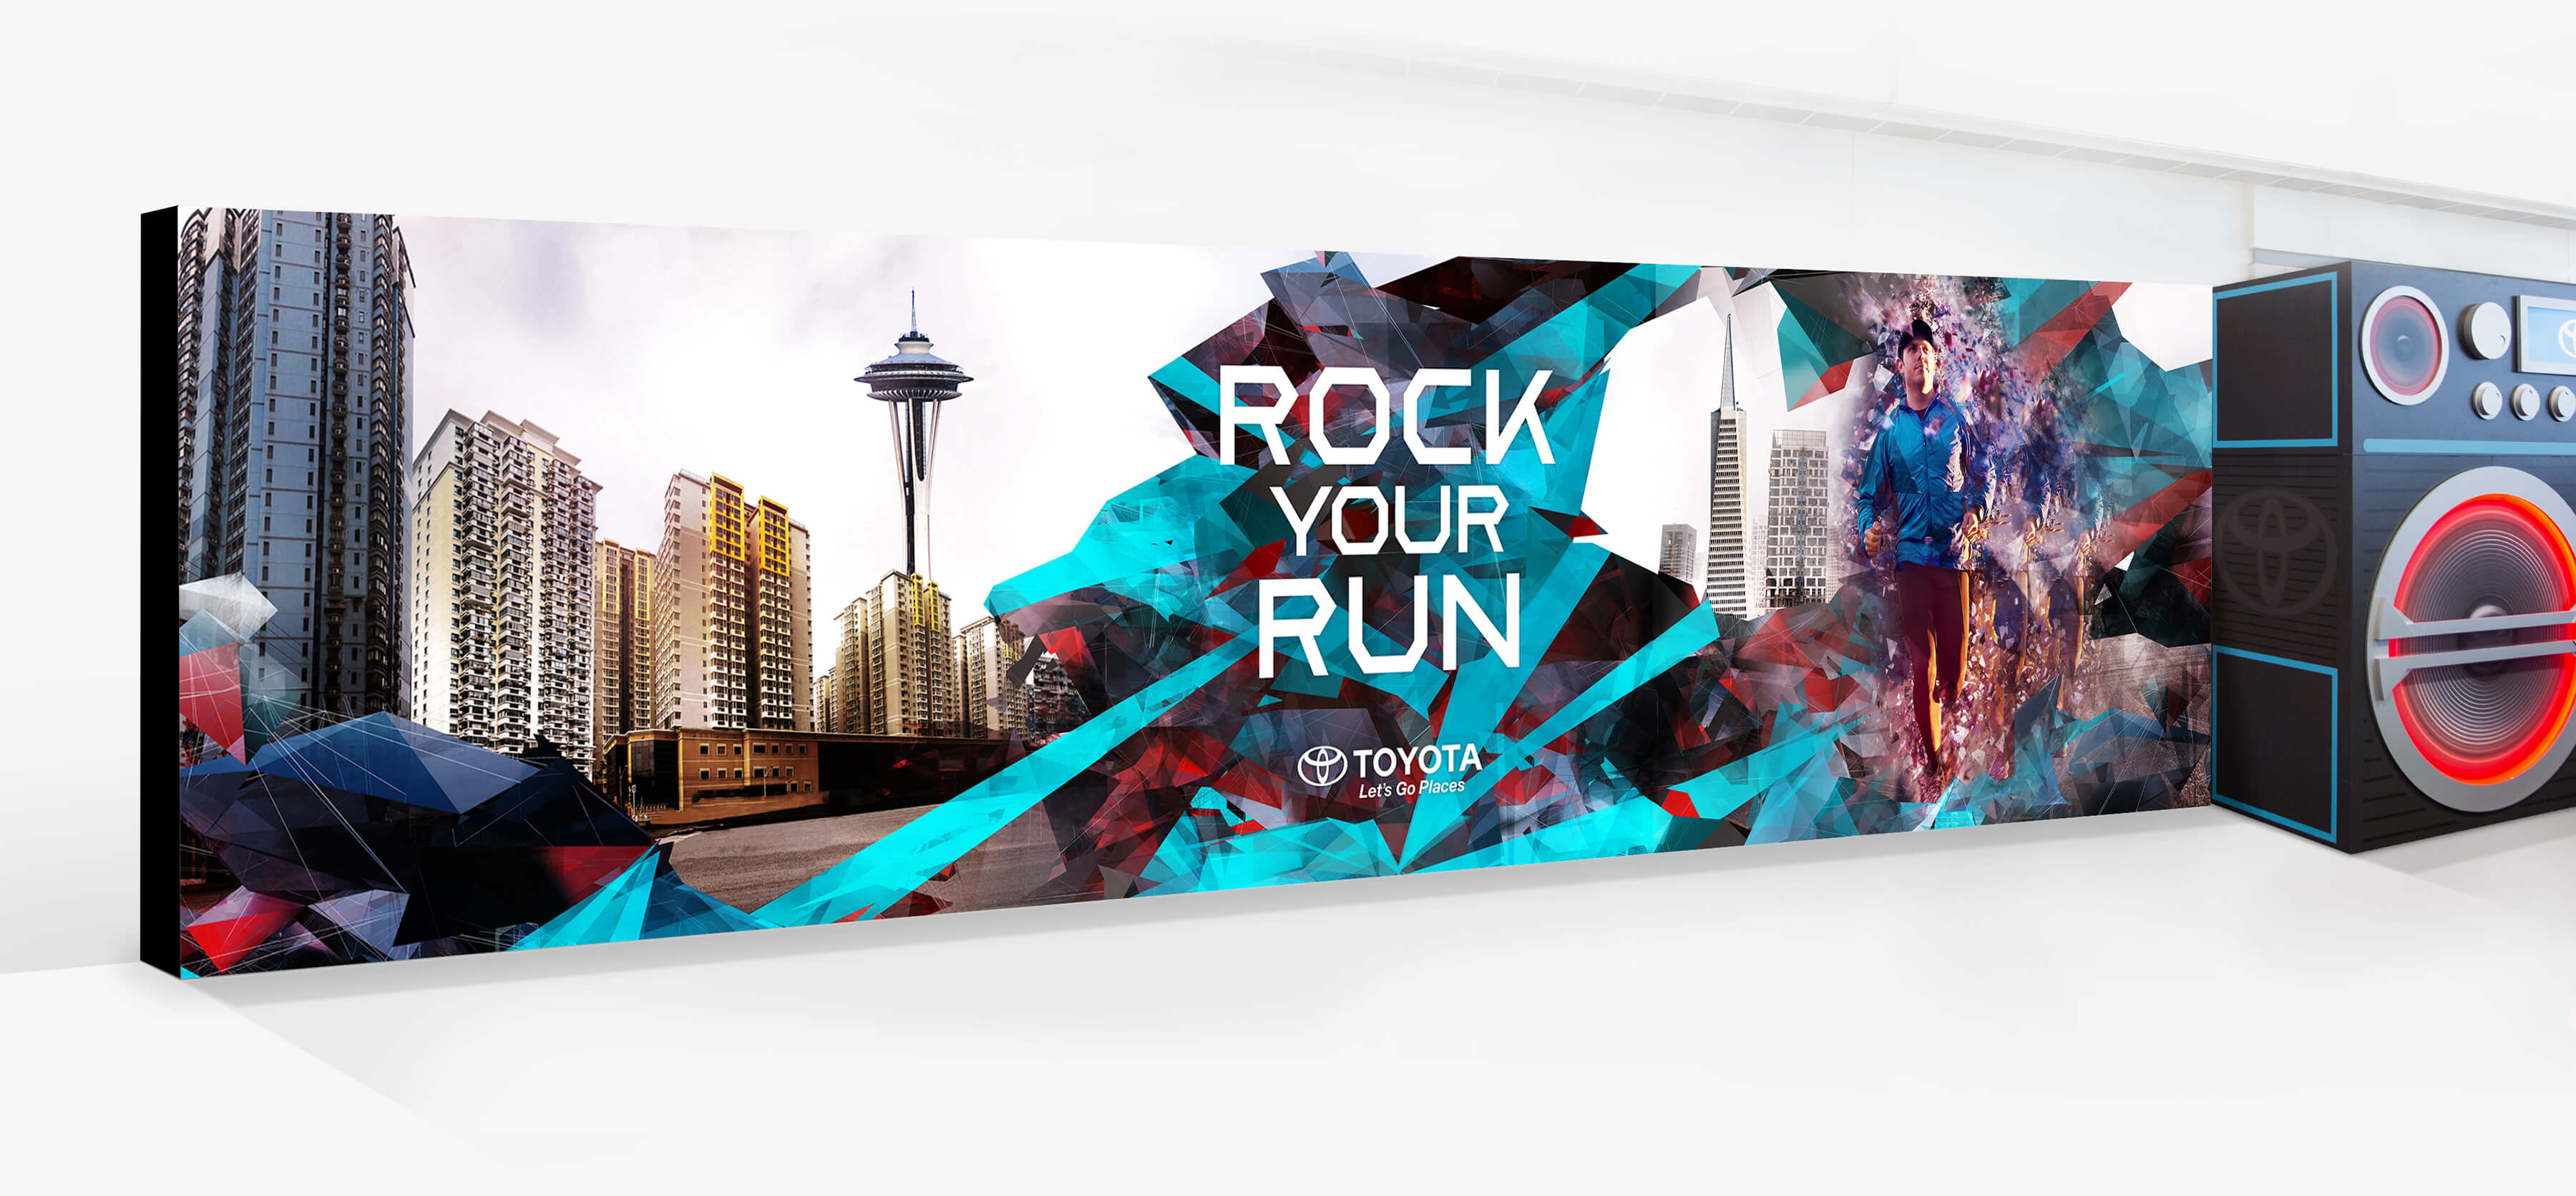 Toyota Rock Your Run back wall left panel featuring the Rock Your Run logo a city scape, the Seattle Space Needle, the San Francisco Transamerica Pyramid, dynamic geometric fragments, male runner, and the boombox.